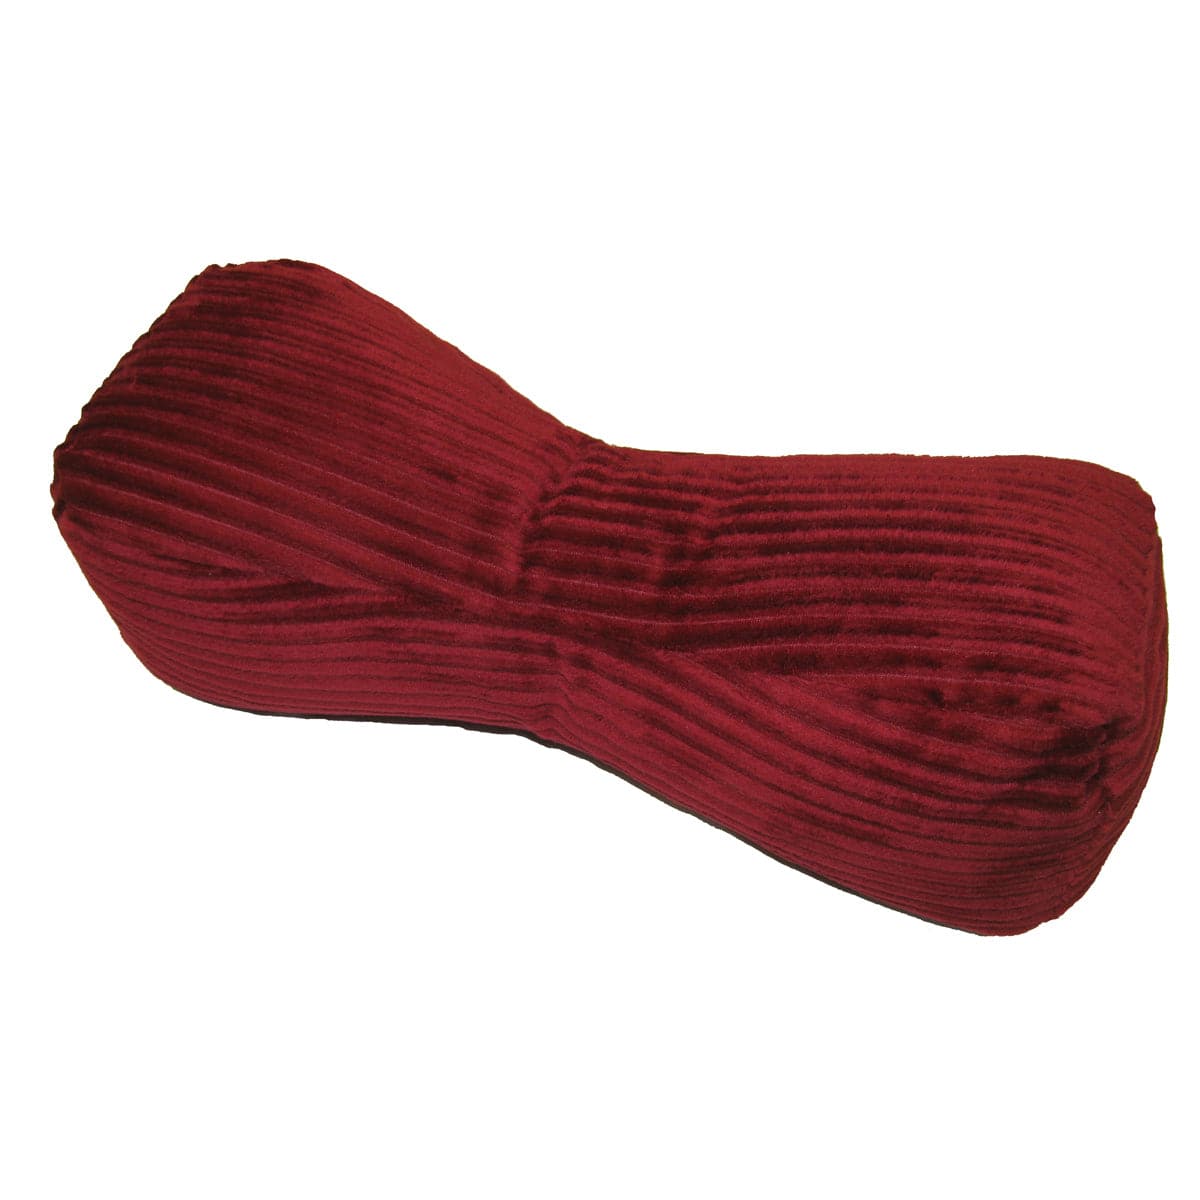 Travel Buddy Neck Support Pillow in Wide Wale Corduroy Claret Red